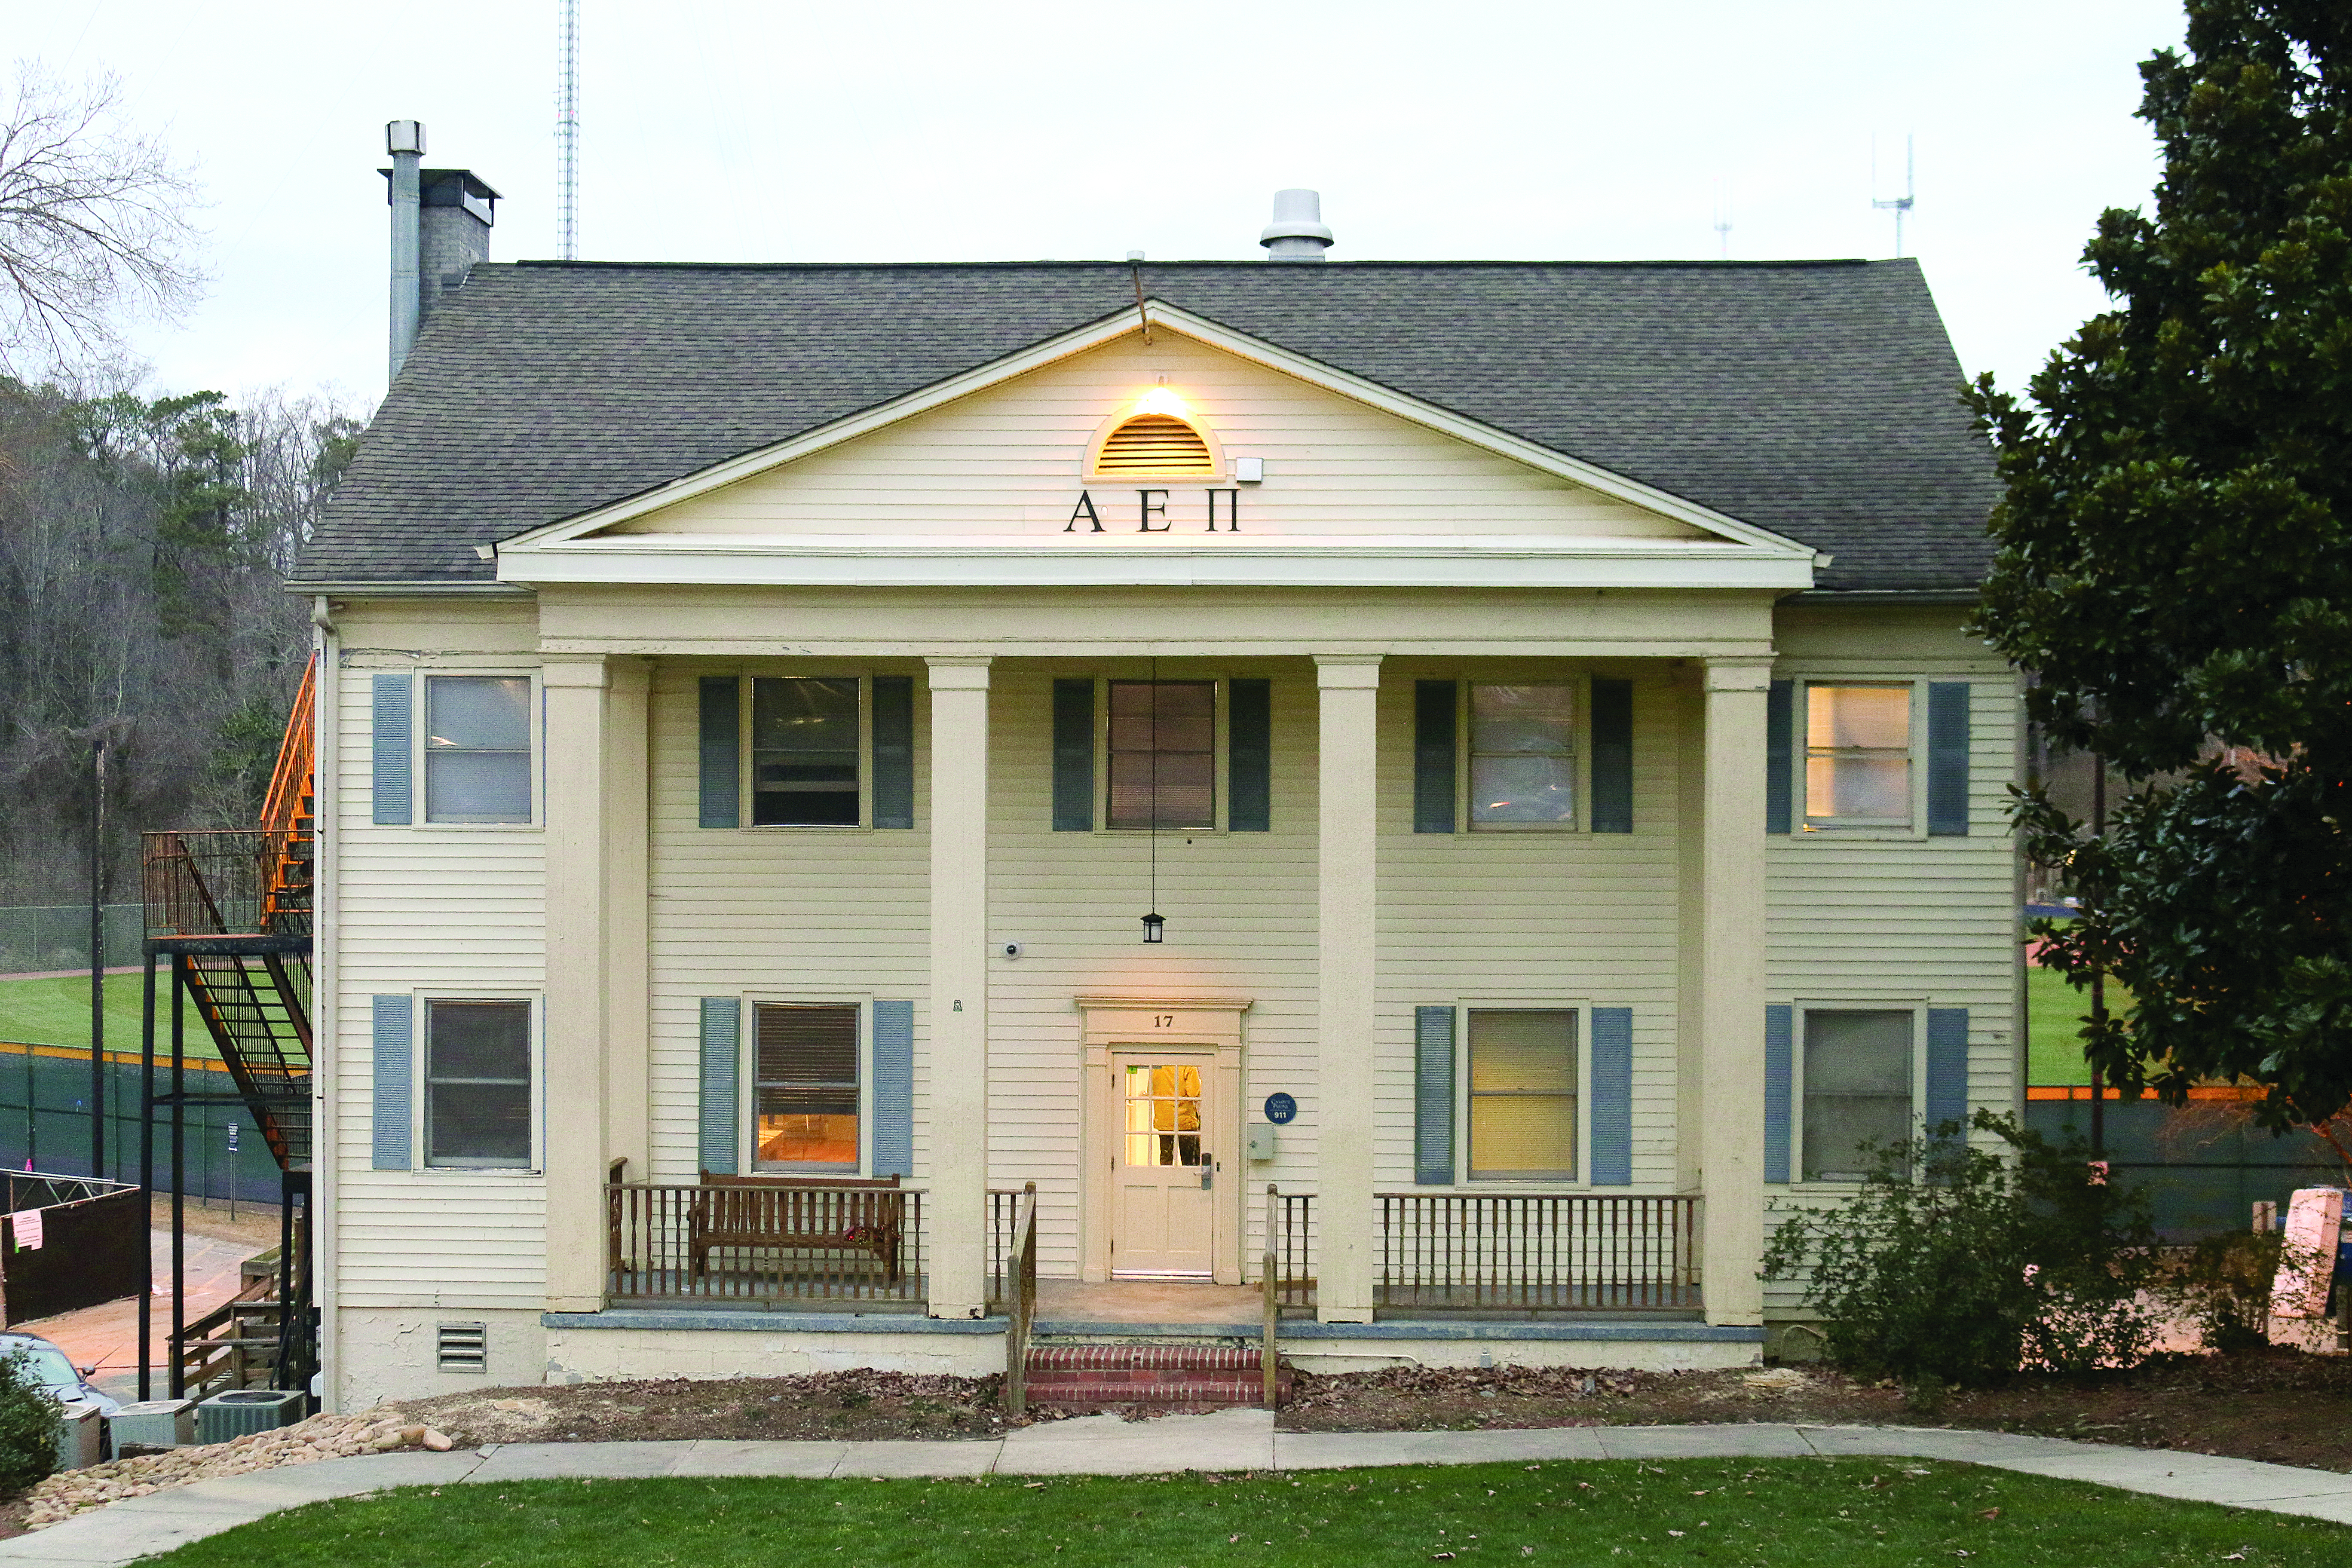 AEPi Faces Social Sanction After President Charged With Cocaine Possession